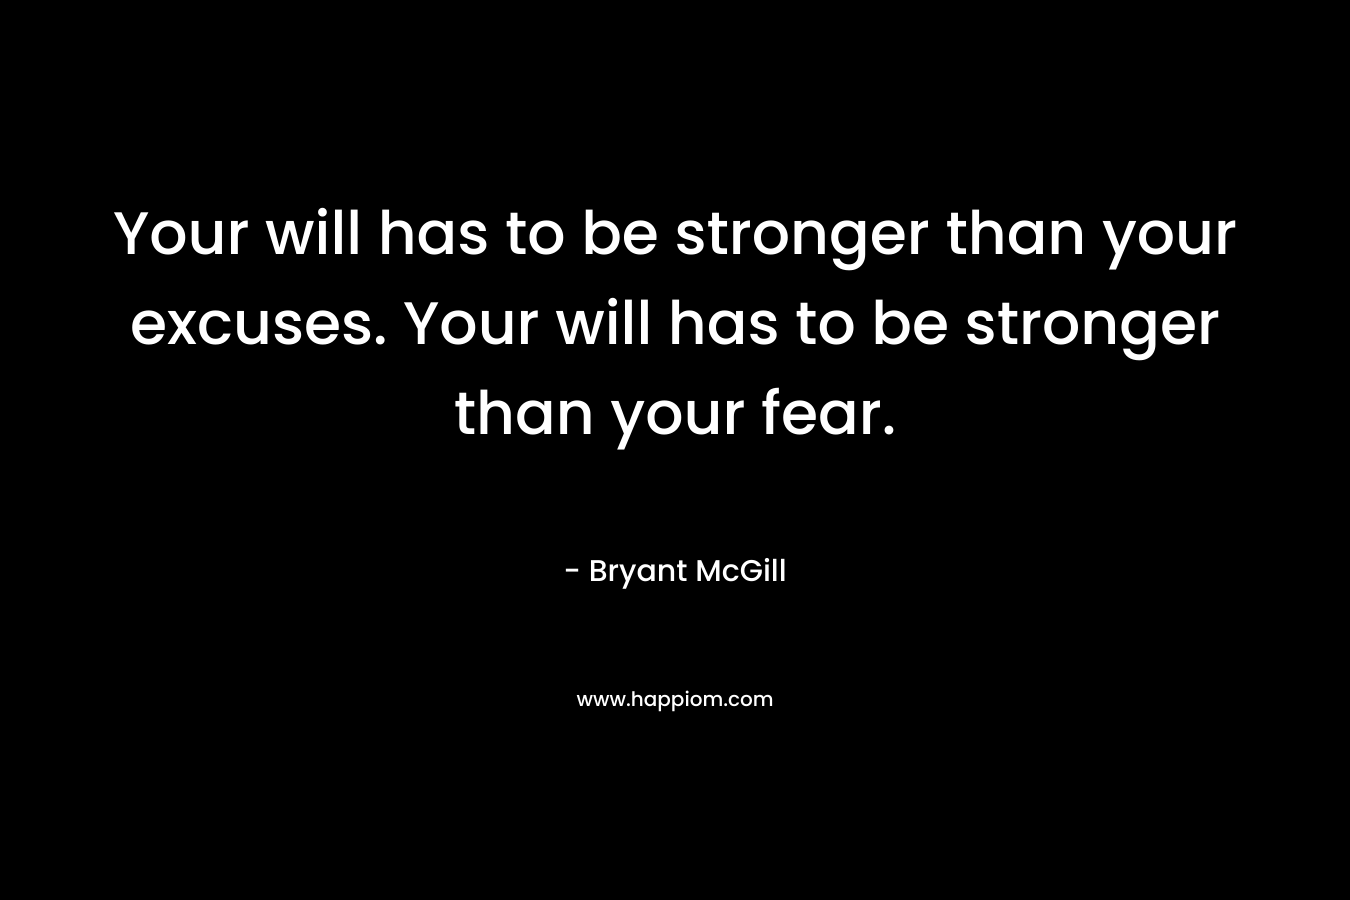 Your will has to be stronger than your excuses. Your will has to be stronger than your fear.